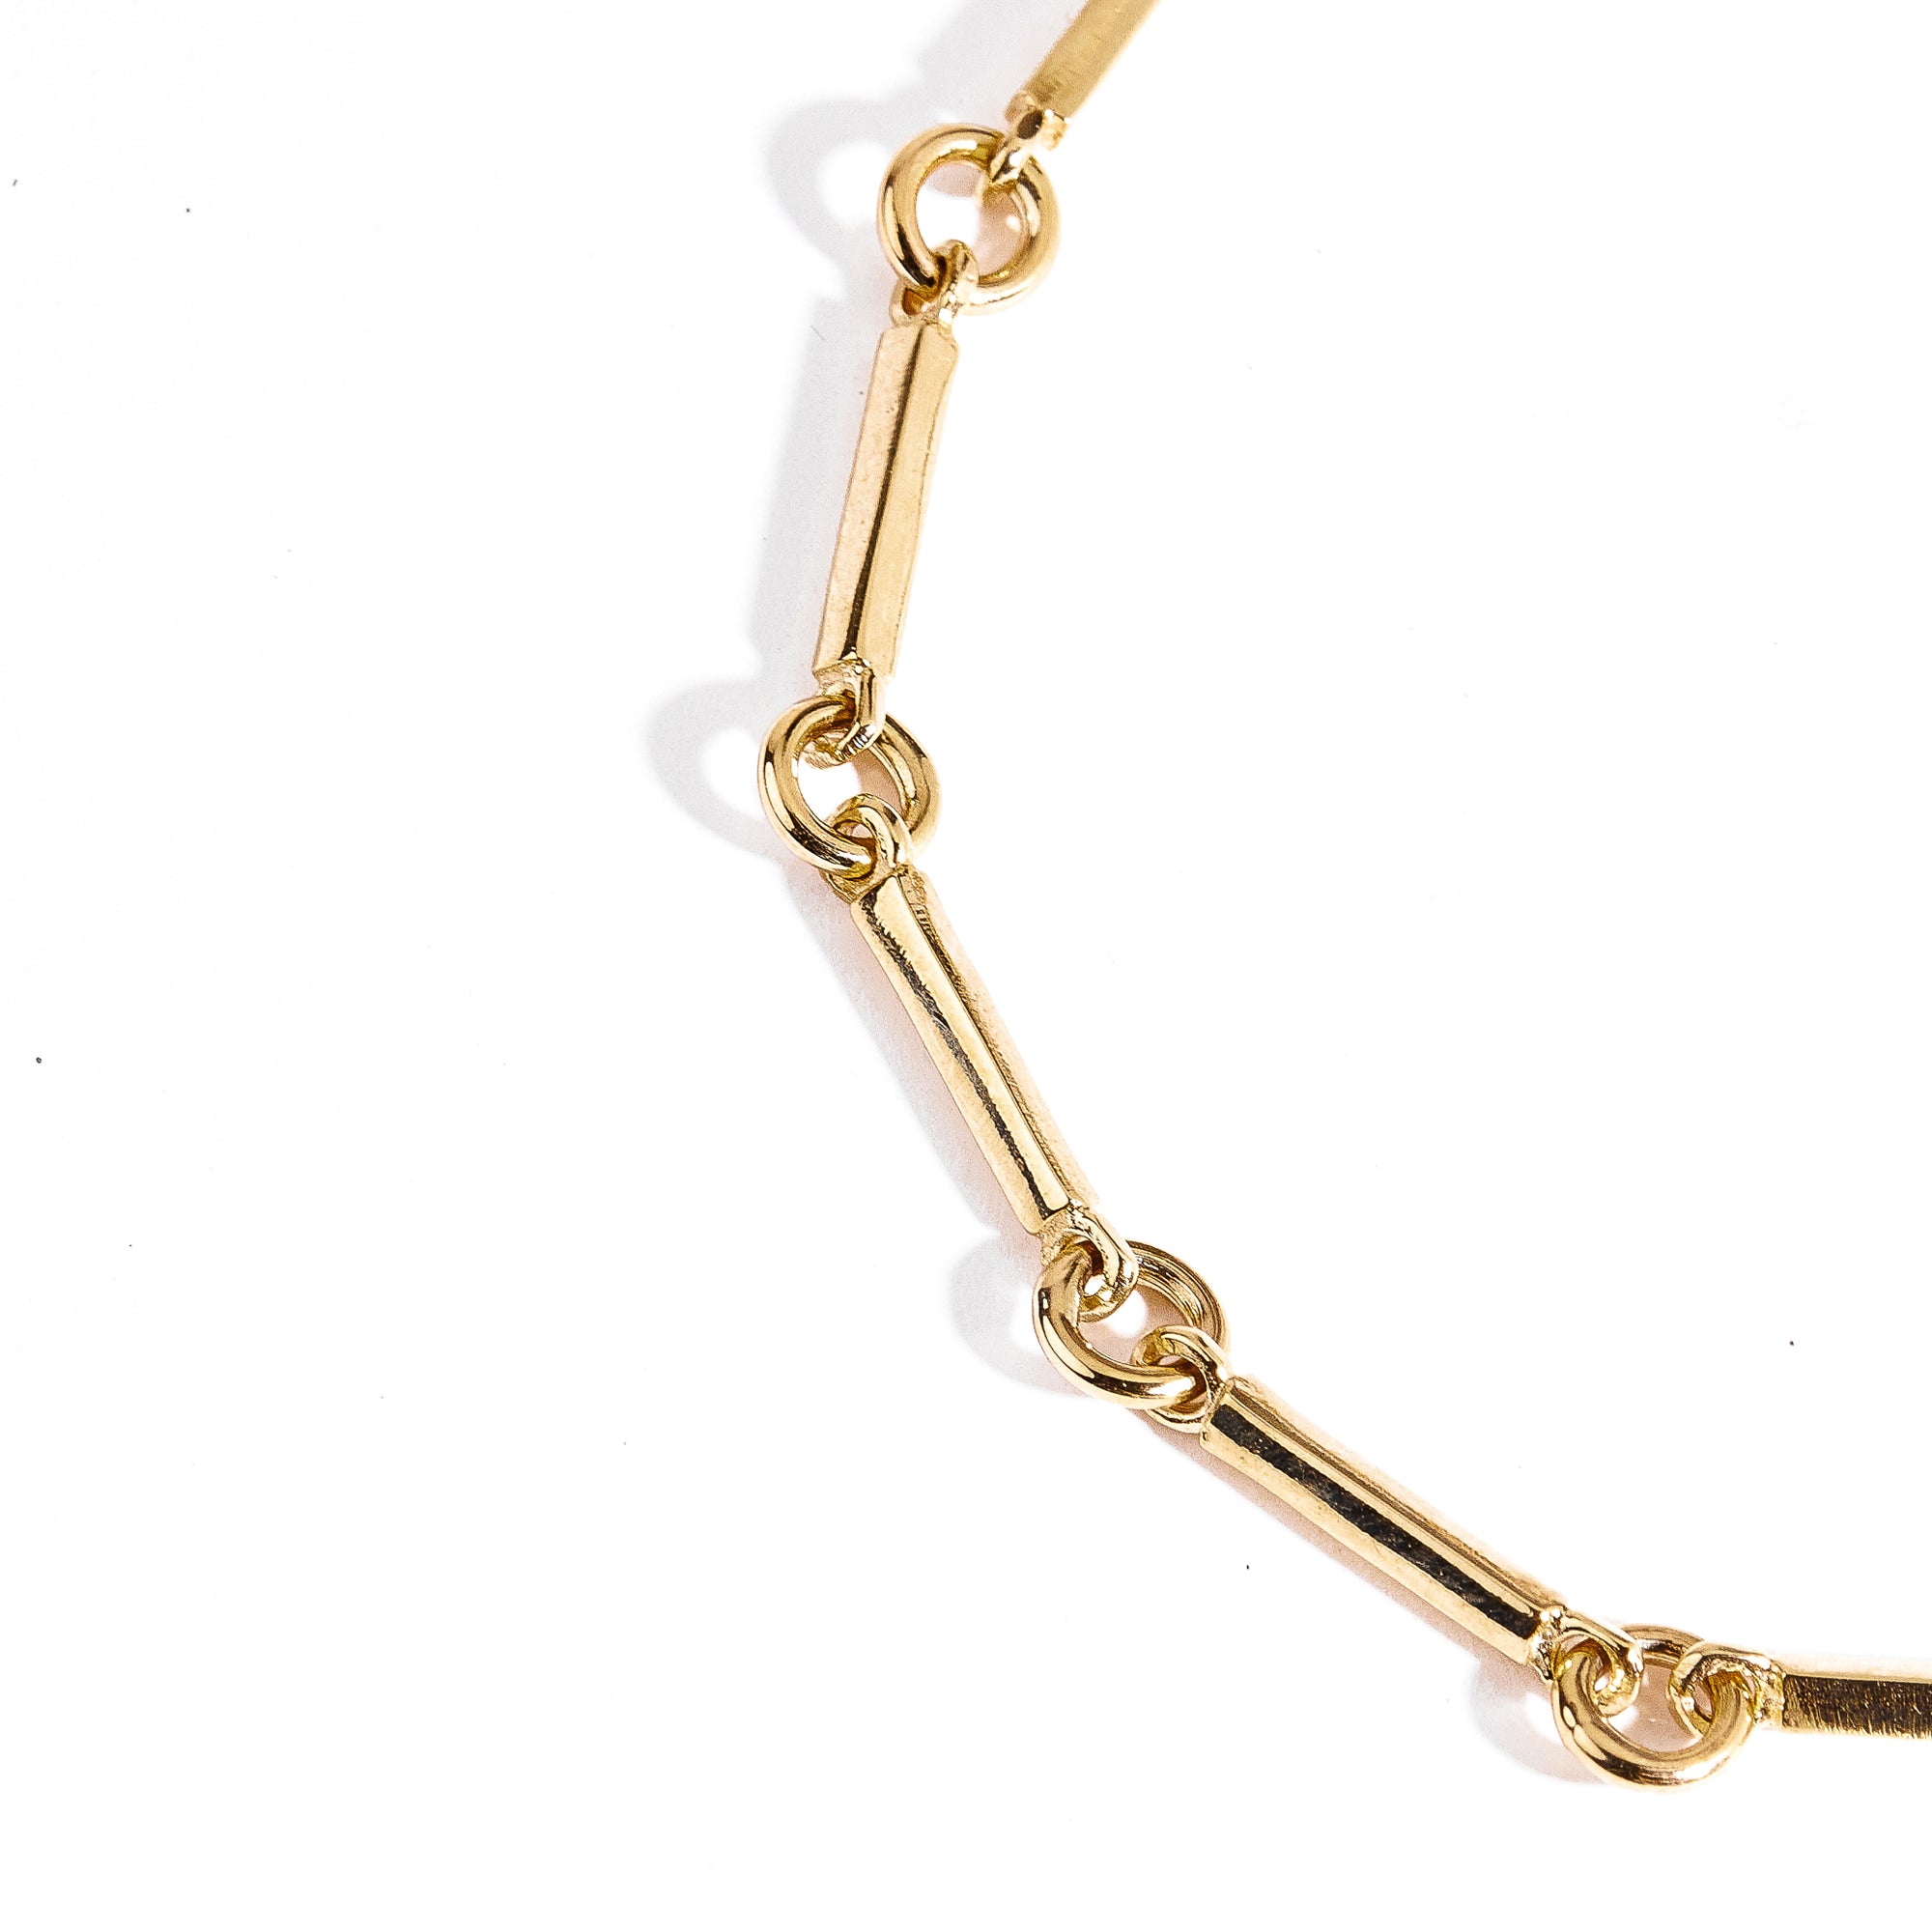 Bar and loop style bracelet crafted in 9ct yellow gold